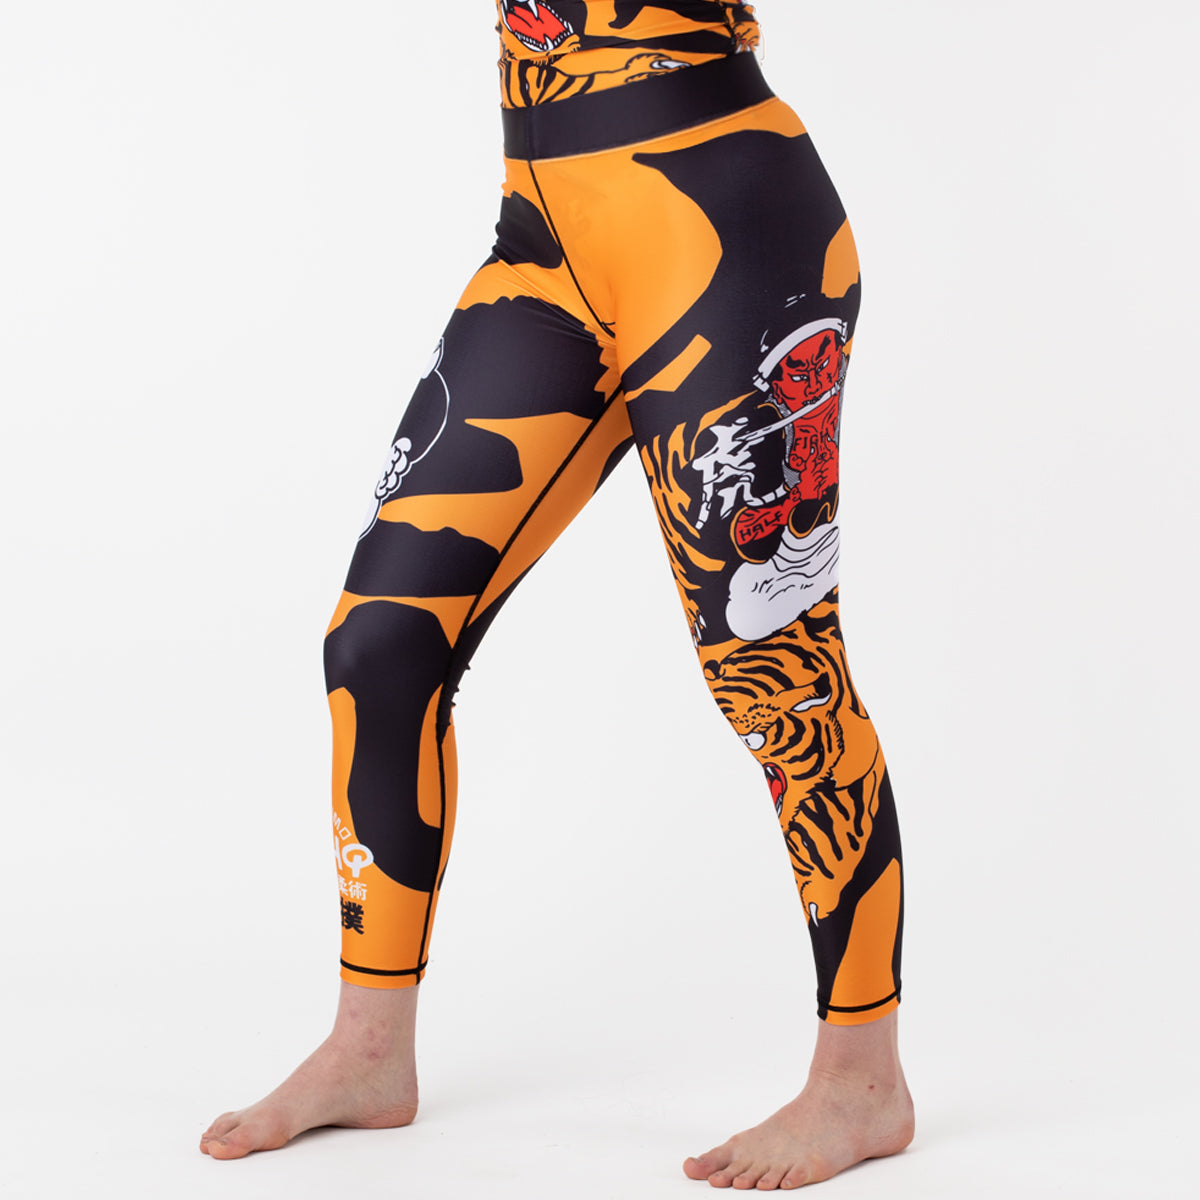 Hydro Ombre Grappling Spats - Women's